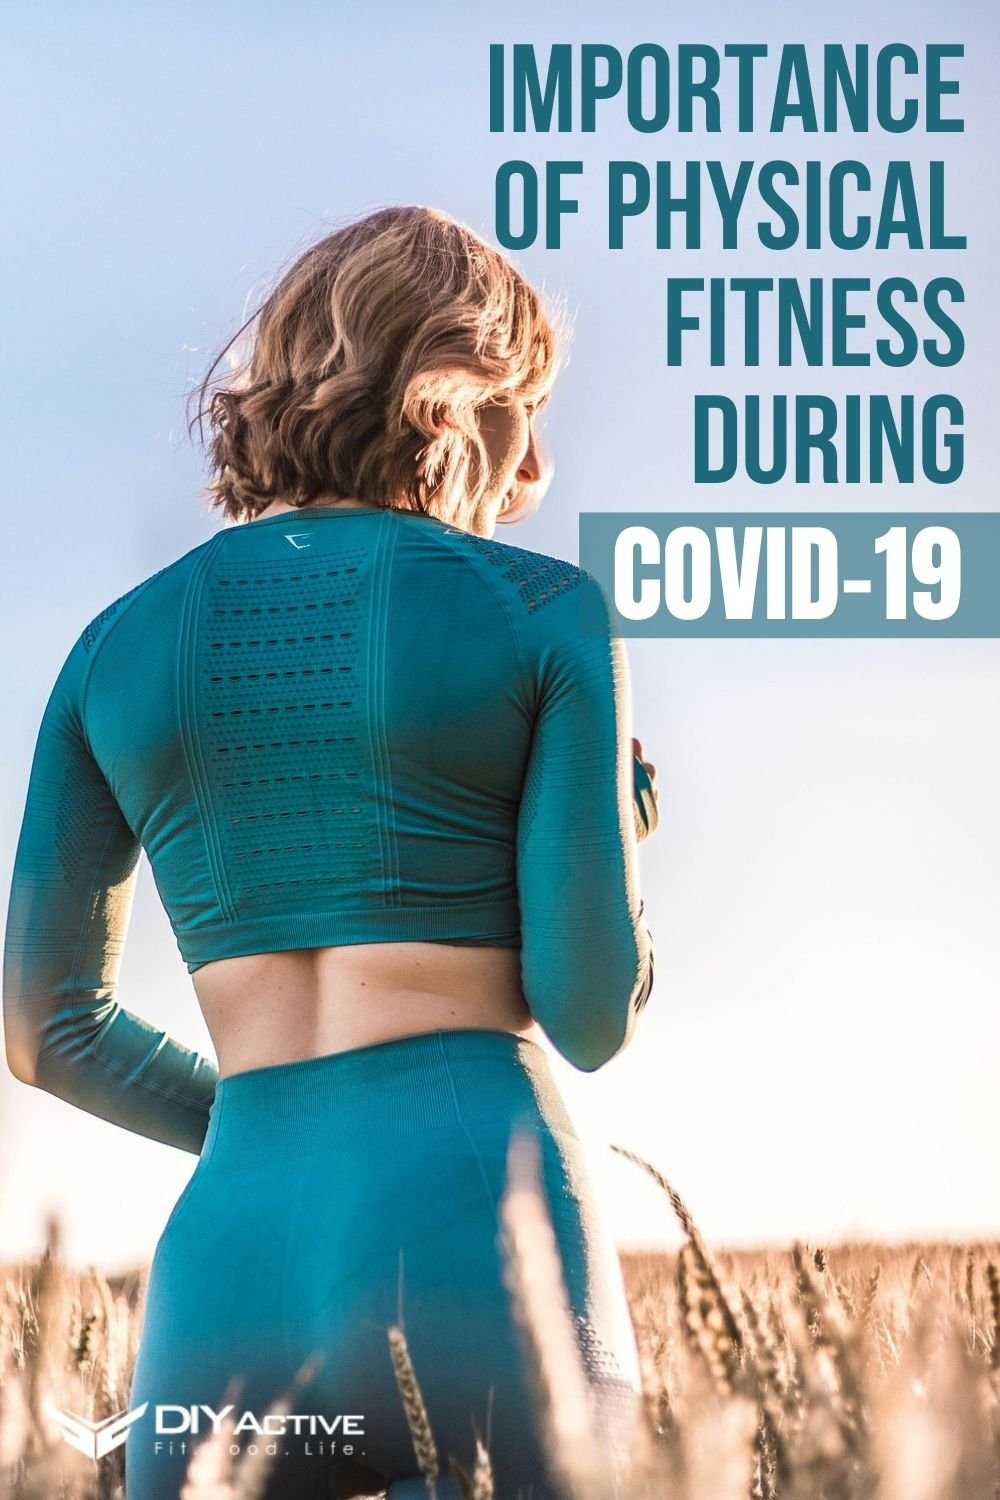 Importance of Physical Fitness During COVID-19